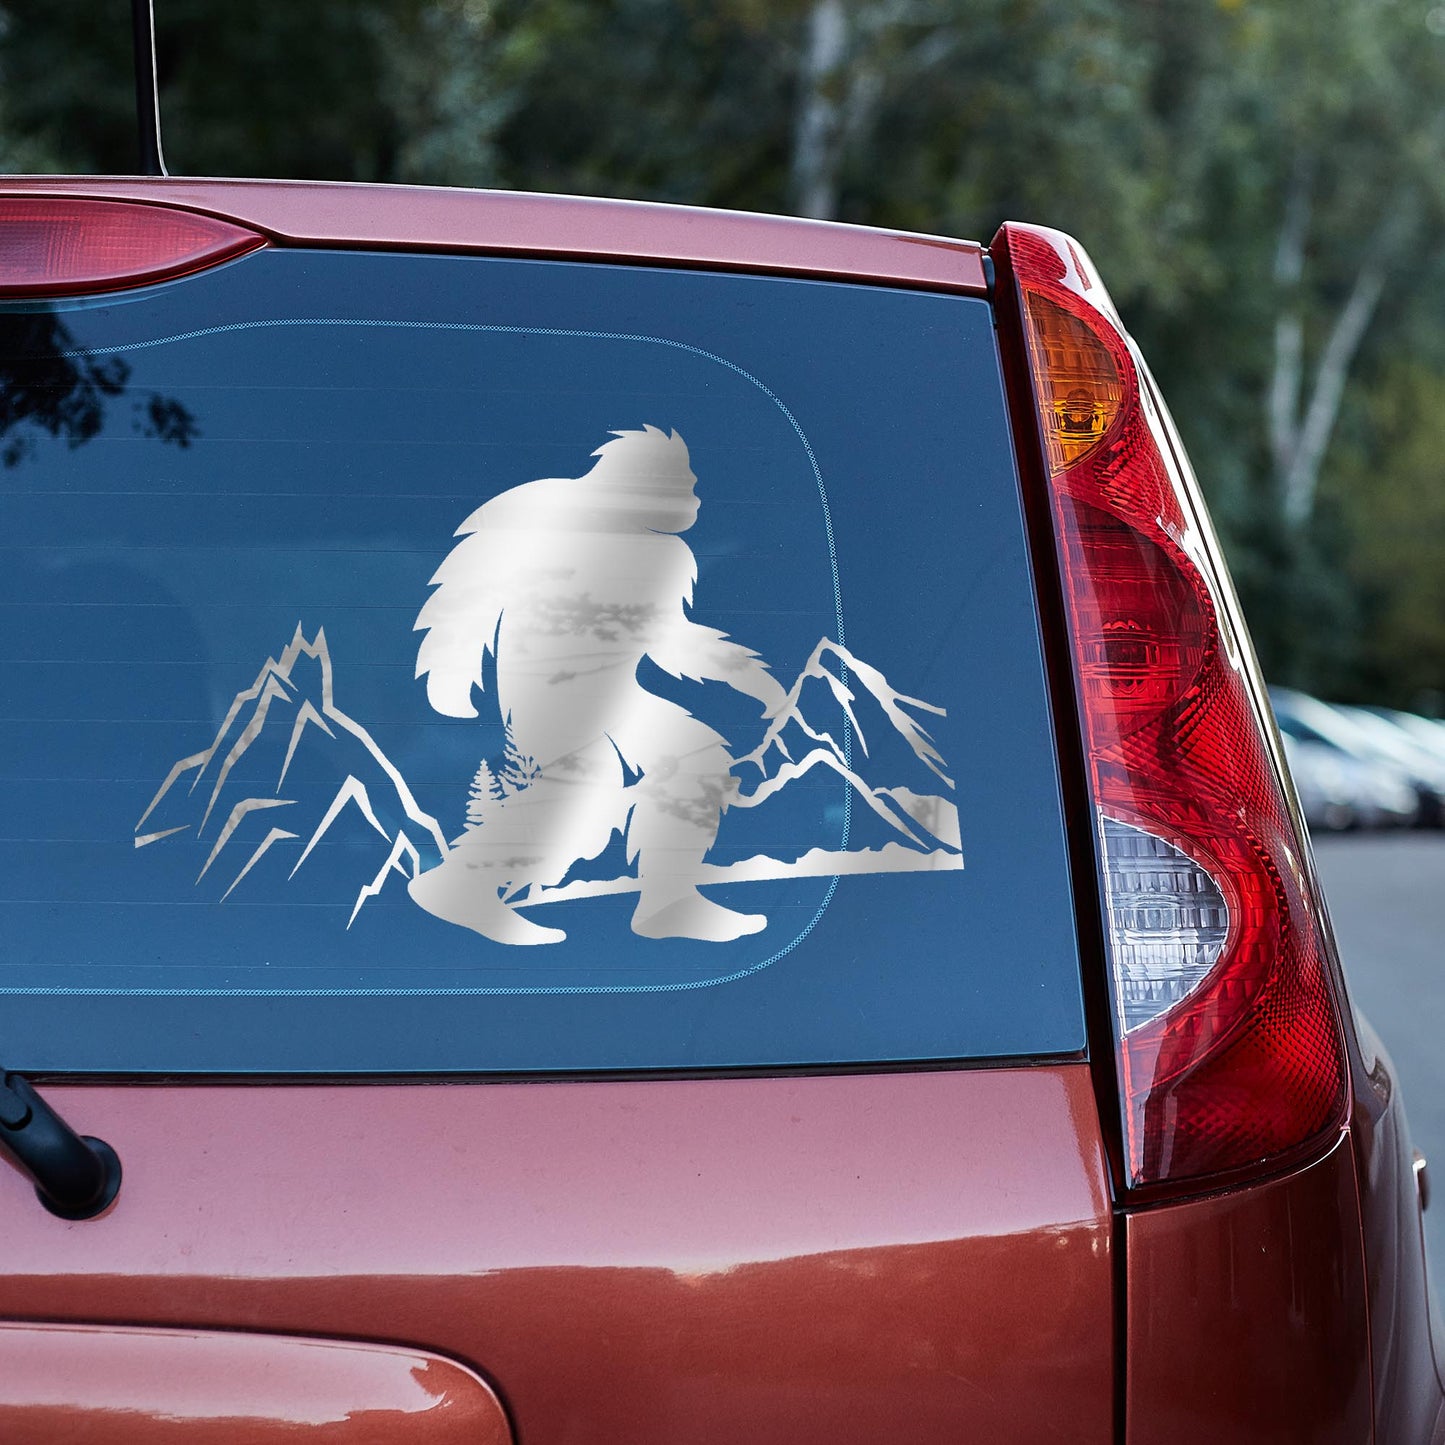 Bigfoot Vinyl decal decal stickers Decals for cars Decals for Trucks decals for tumblers minivan sticker SUV decals truck decals window decal car Window decals window decor